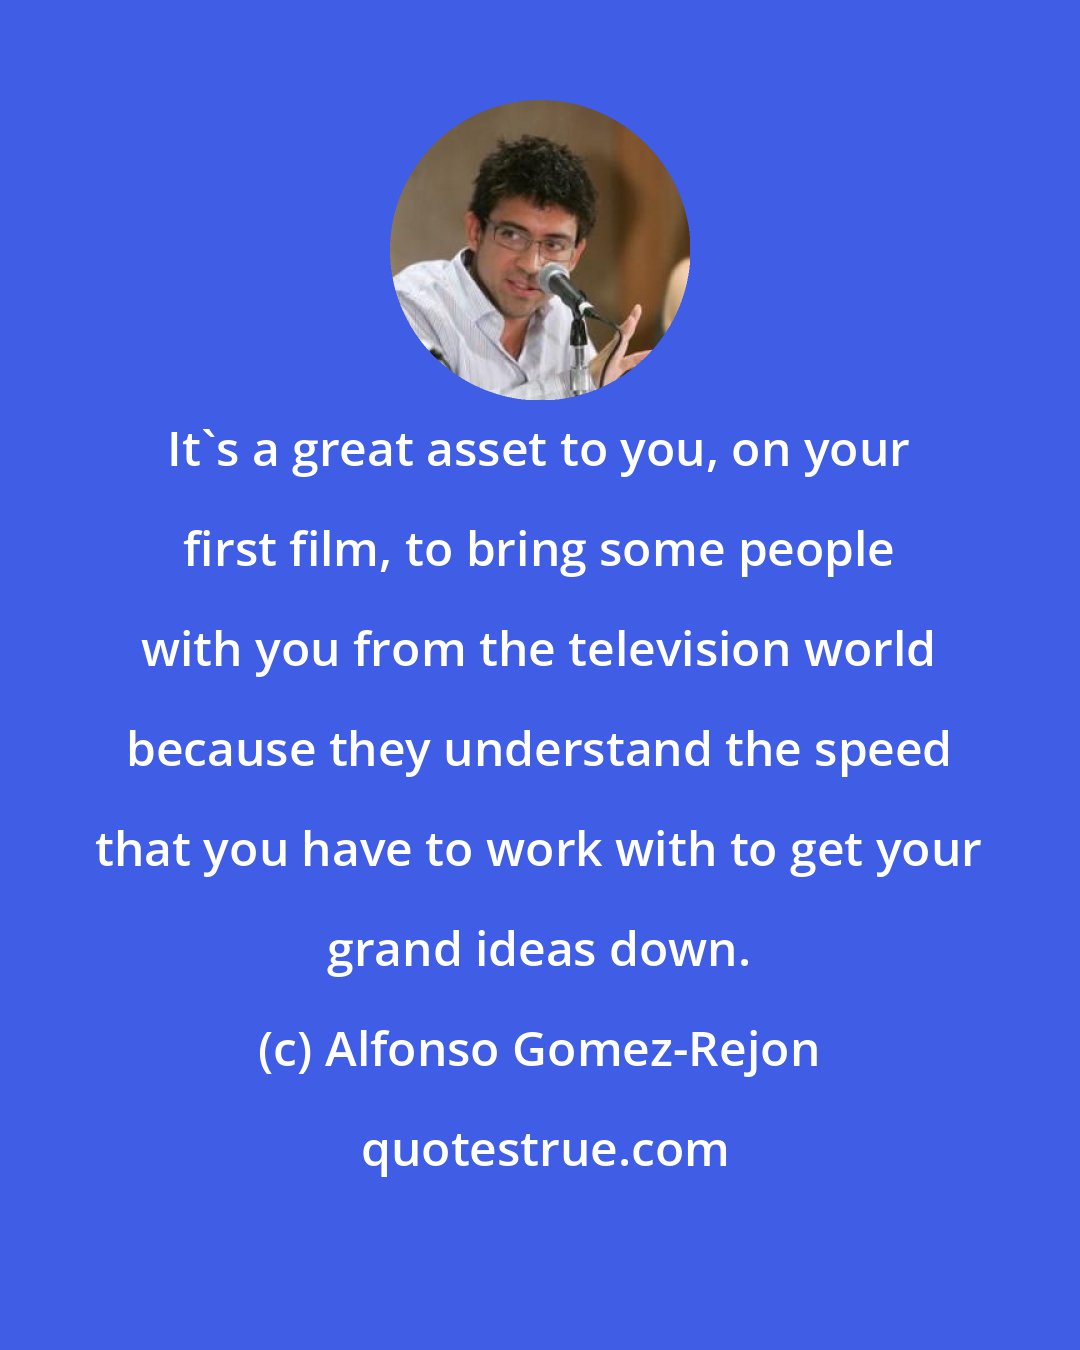 Alfonso Gomez-Rejon: It's a great asset to you, on your first film, to bring some people with you from the television world because they understand the speed that you have to work with to get your grand ideas down.